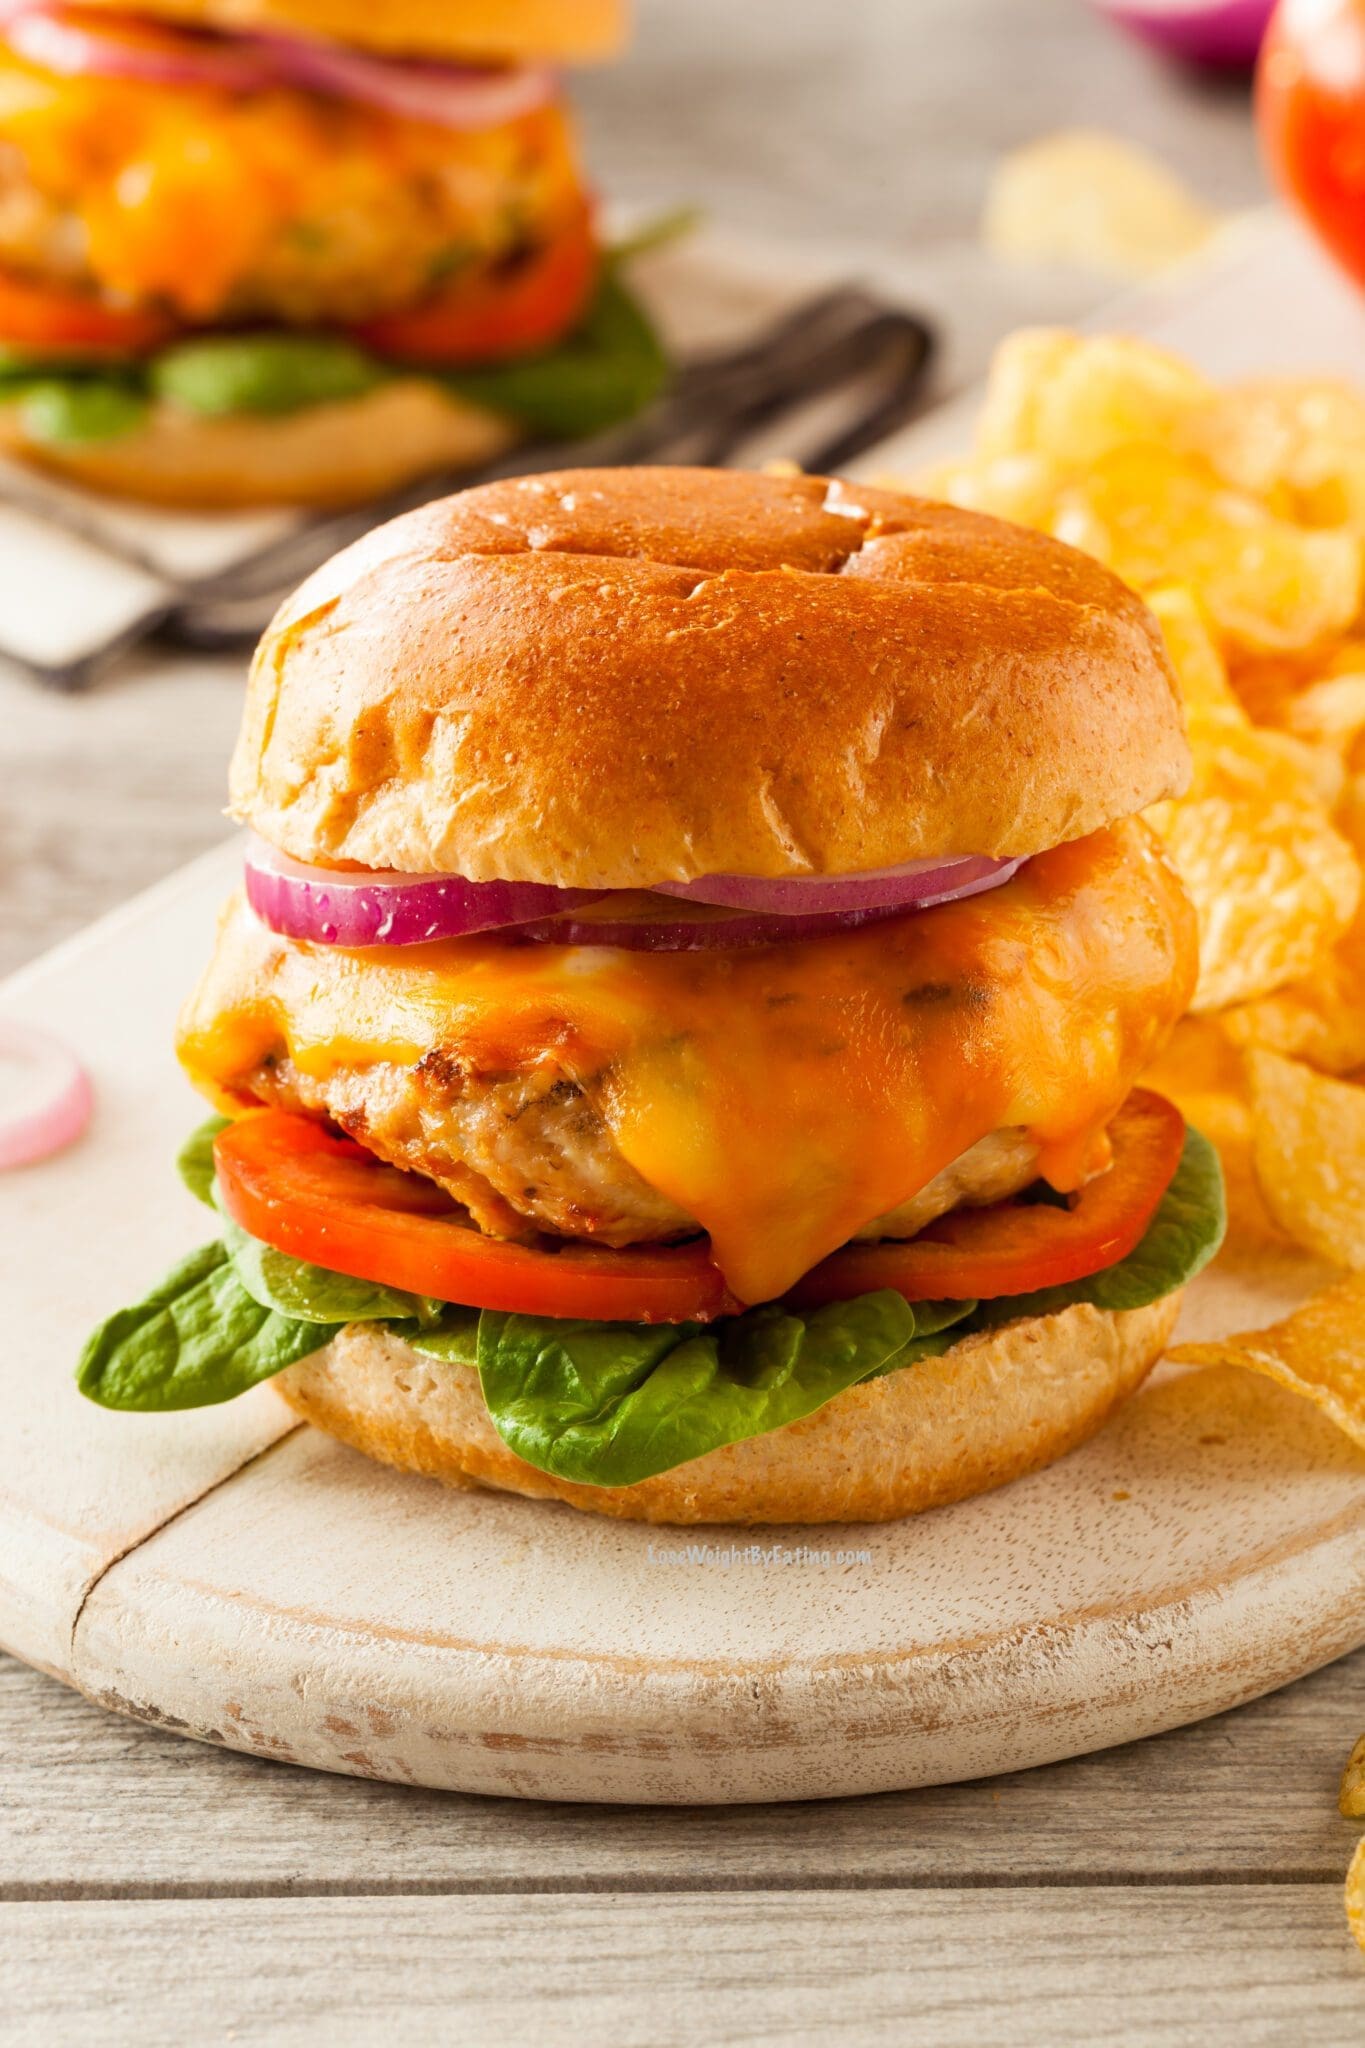 Low Calorie Chicken Burger - Lose Weight By Eating